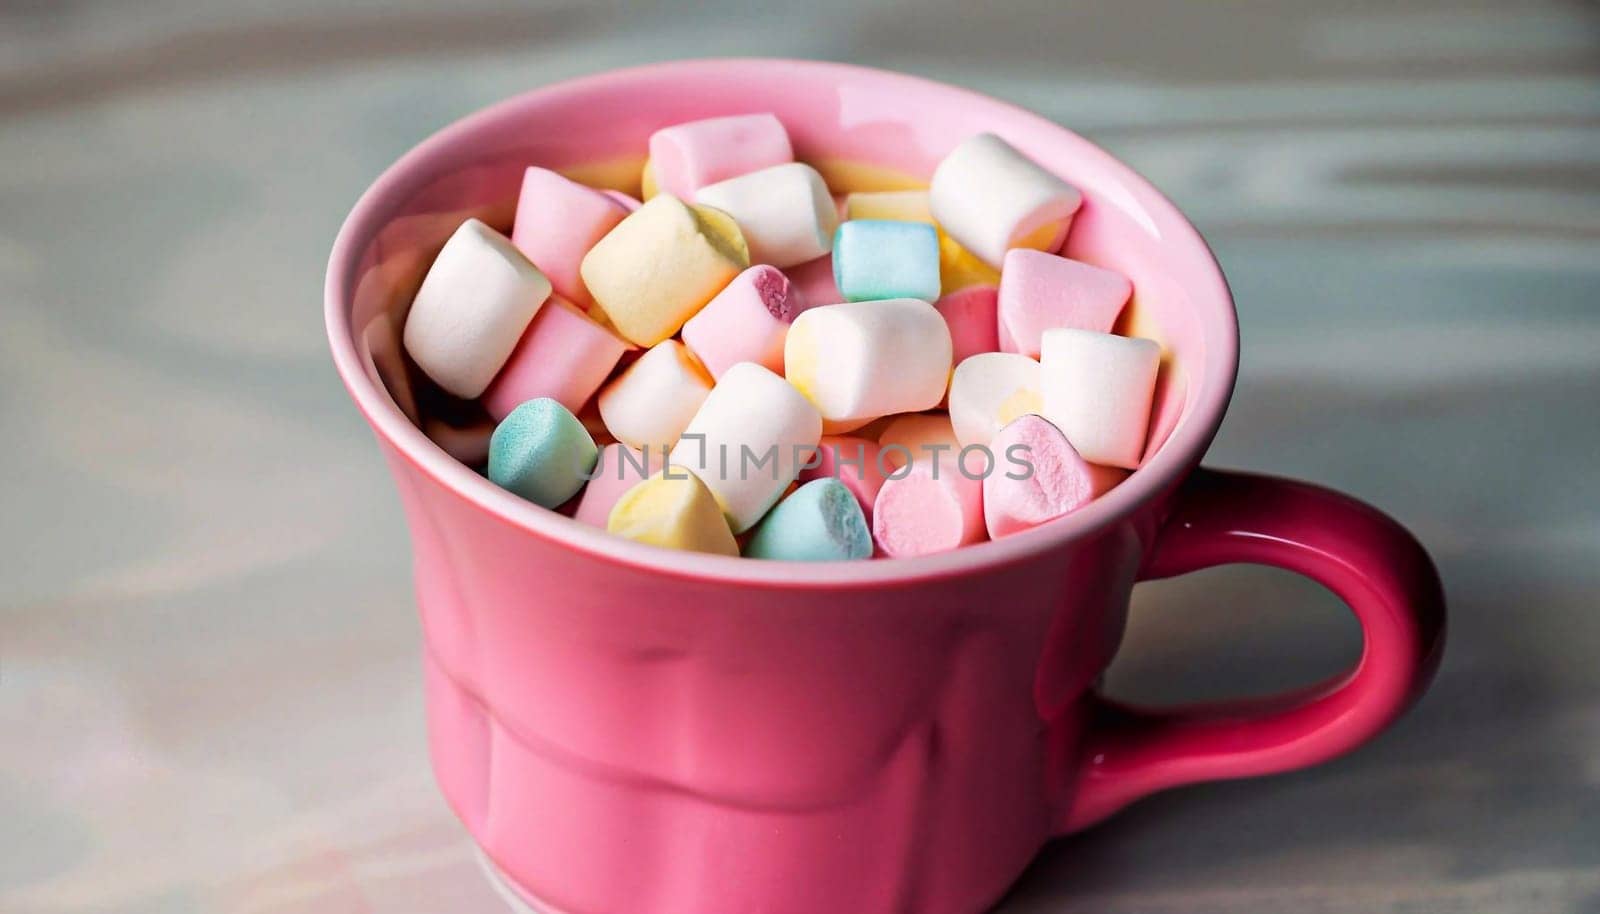 pink cup with multicolored marshmallows by dec925